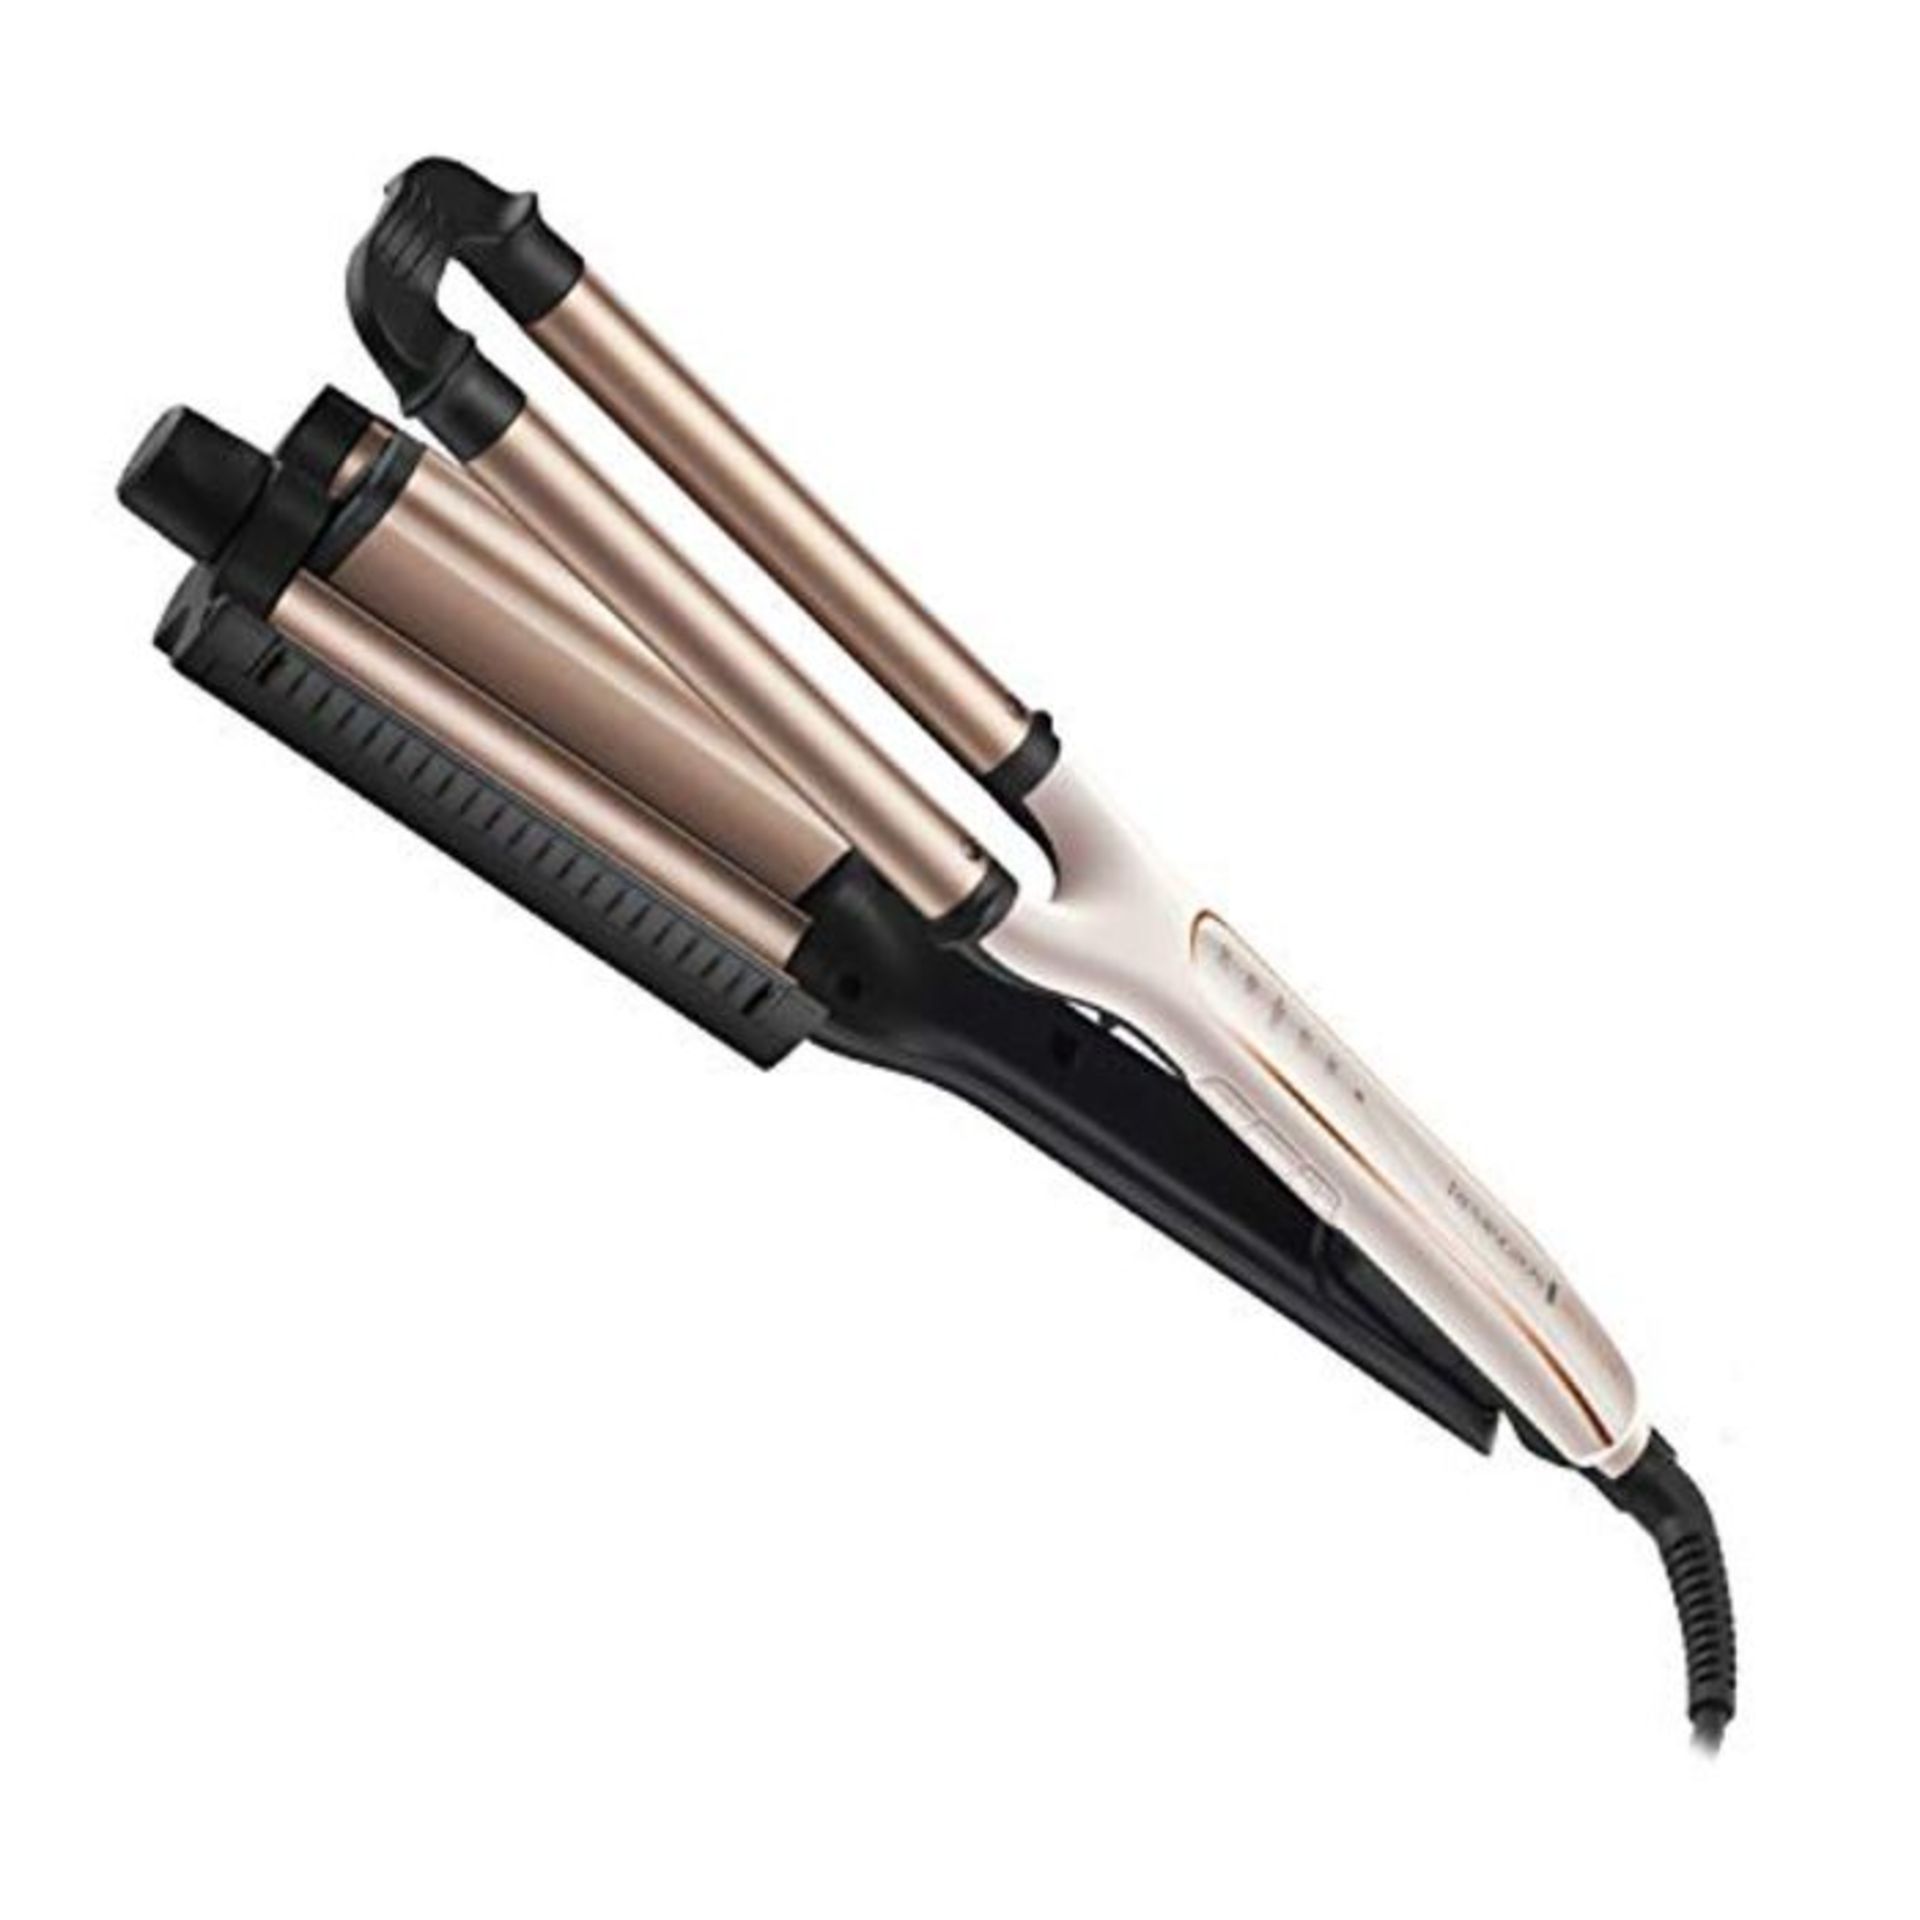 Remington Proluxe 4-in-1 Hair Waver - Deep Barrel Adjustable Hair Curler with 4 Differ